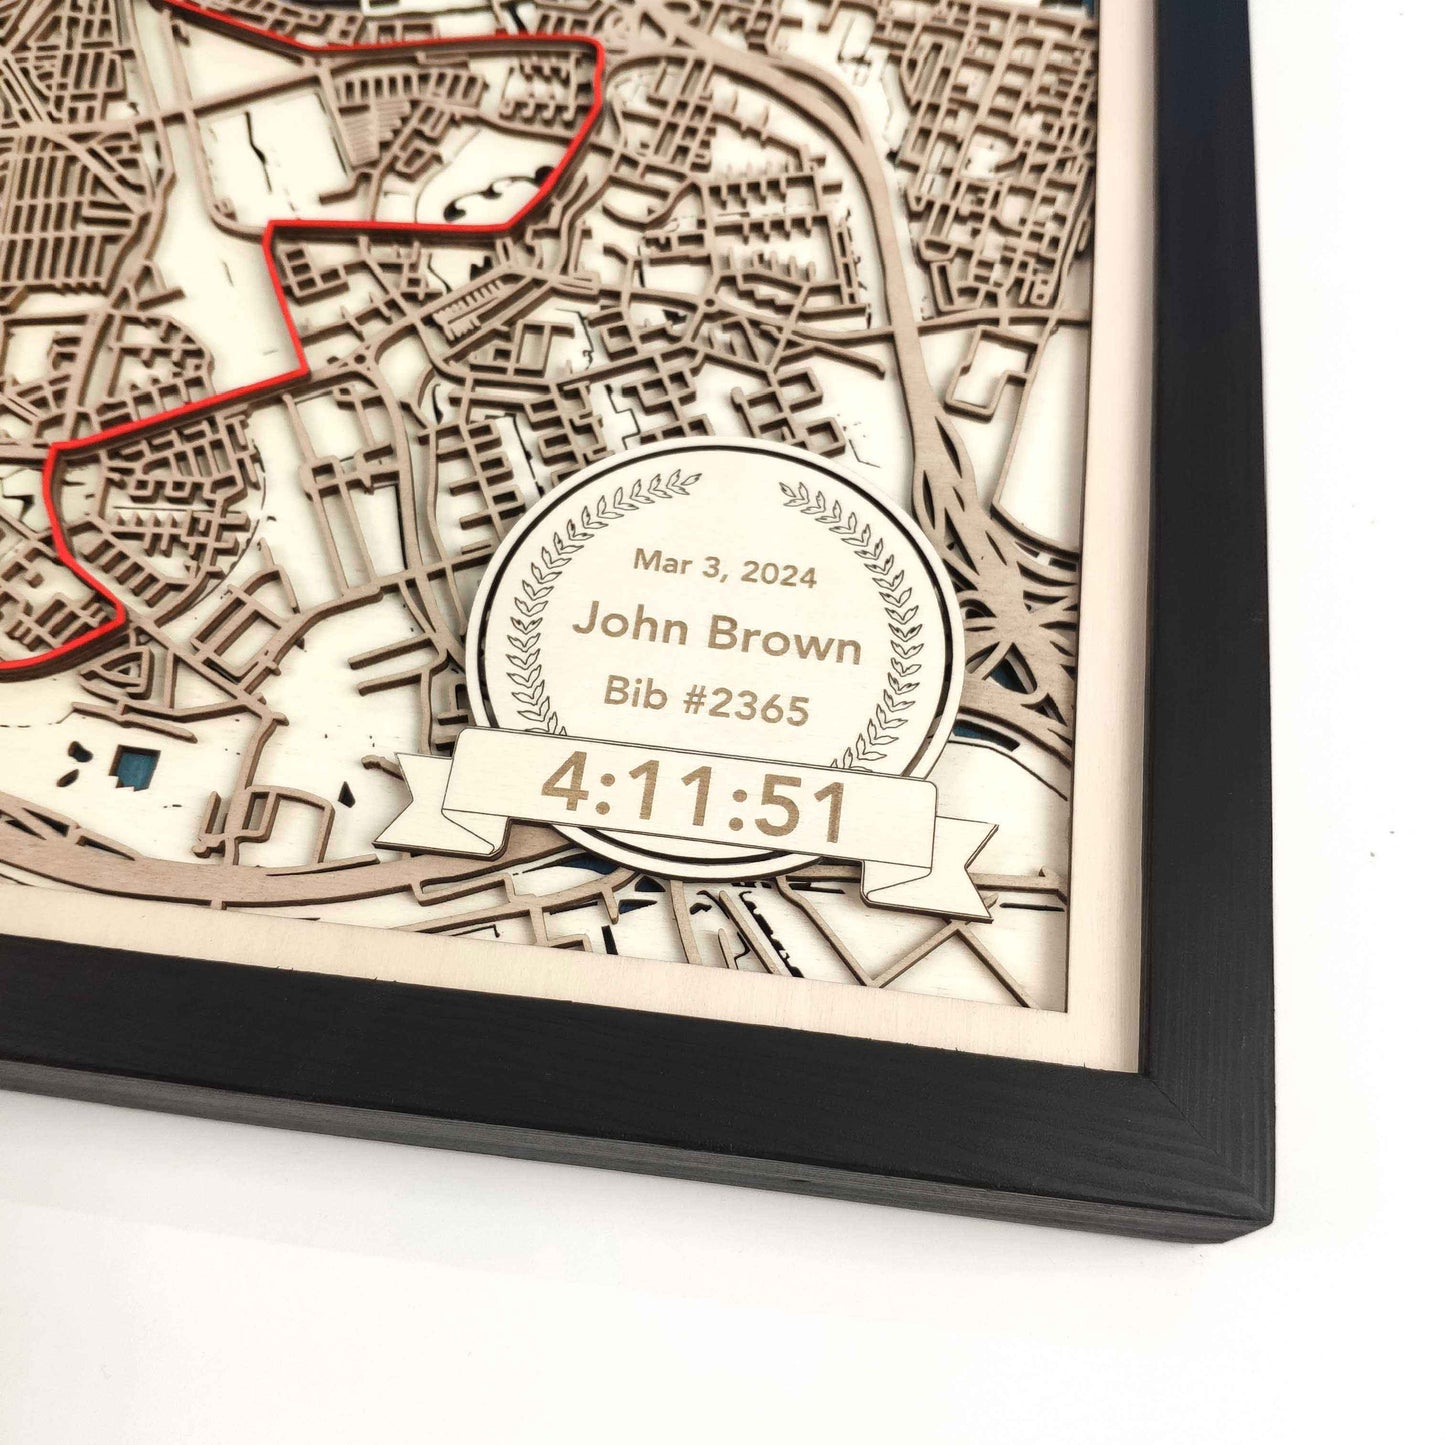 Rotterdam Marathon Wooden Map by CityWood - Custom Wood Map Art - Unique Laser Cut Engraved - Anniversary Gift